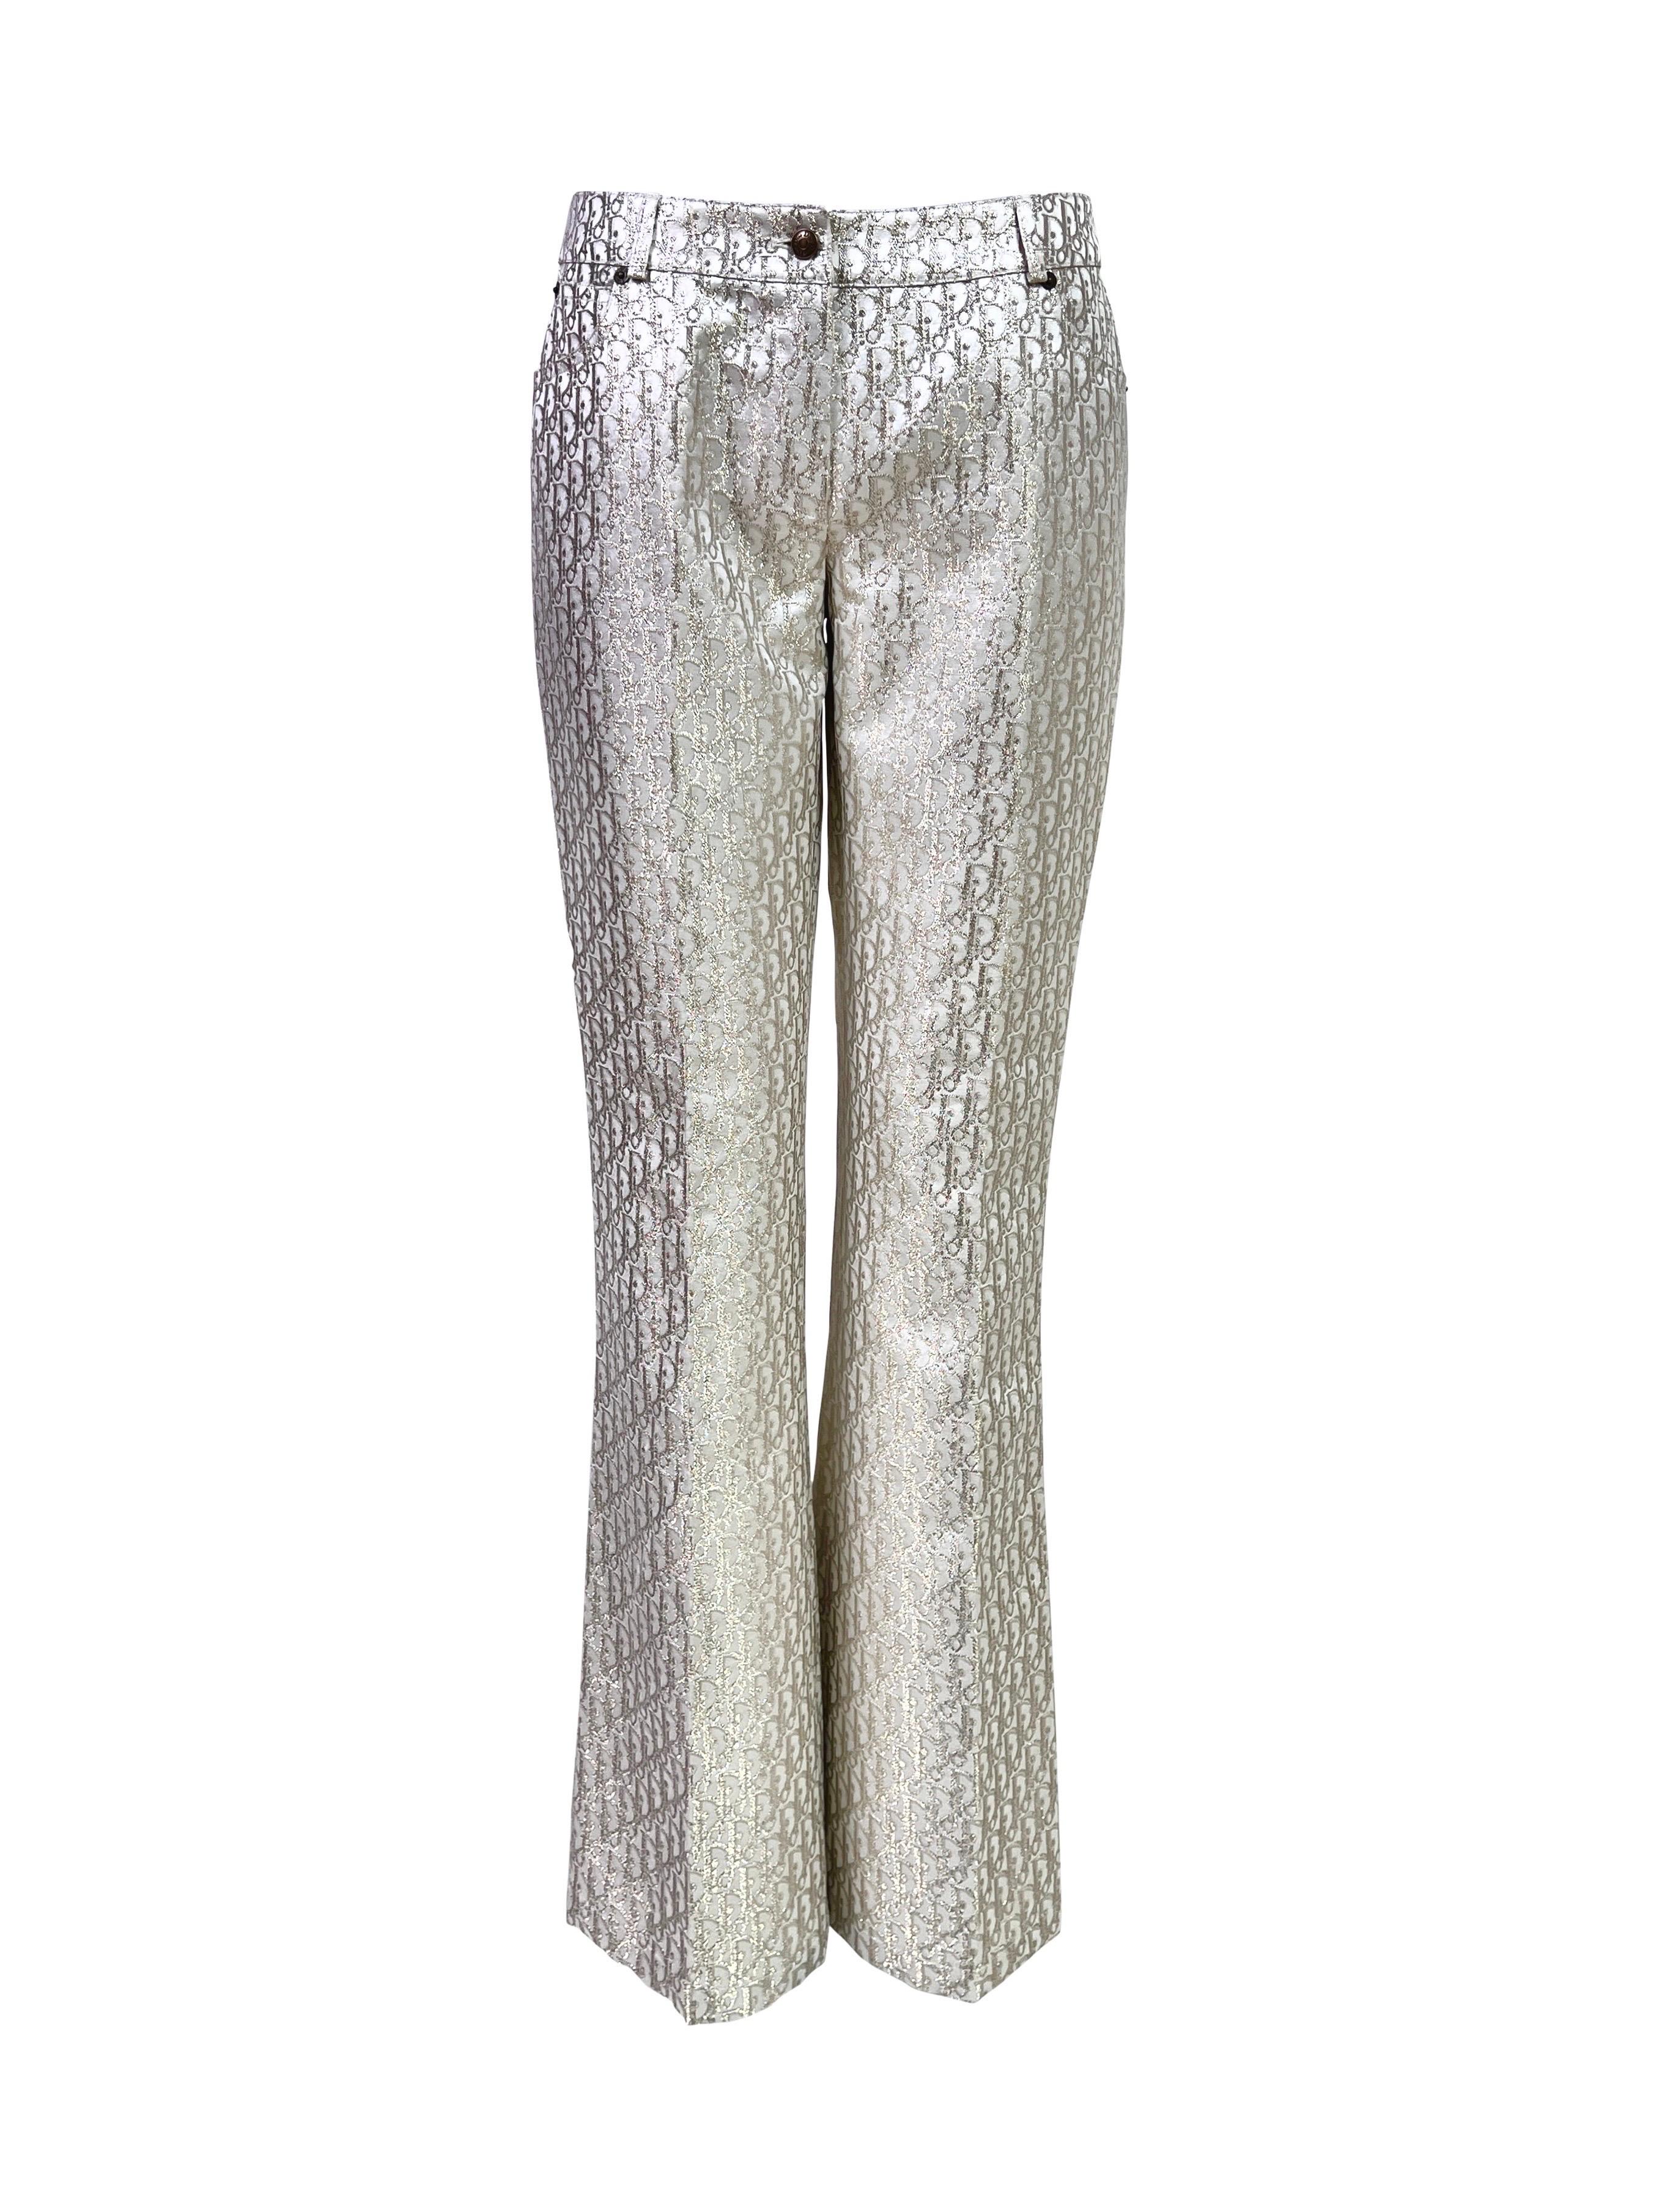 QV Archive proudly presents a rare pair of Dior Monogram trousers from Dior Fall 2004 collection in a gorgeous off-white color with sophisticated golden metallic sheen monogram jacquard fabric. Same textile as seen on the runway (please see the